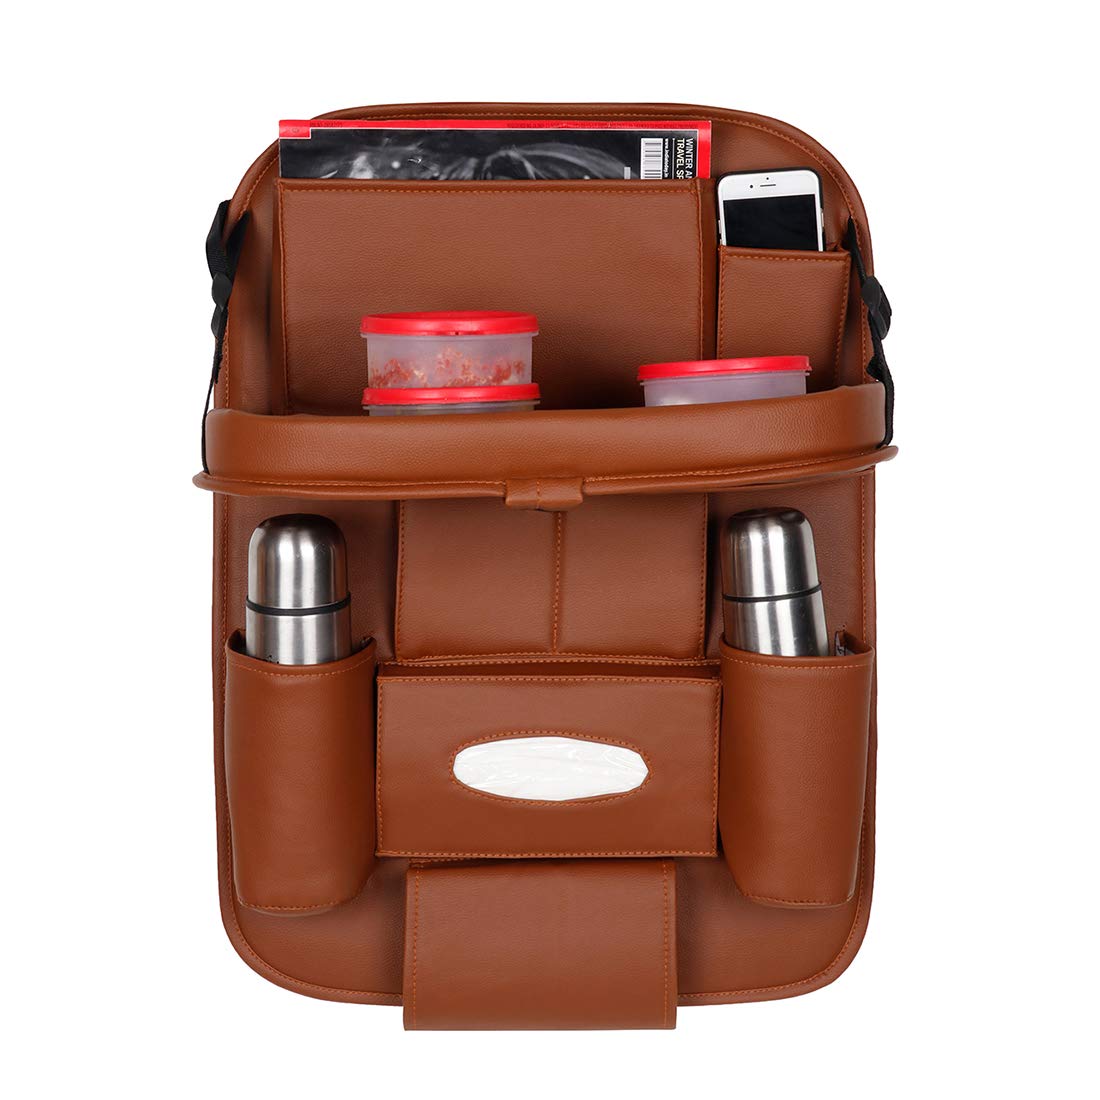 3D PREMIUM Car Seat Organizer | PU Leather with Folding Meal Tray and 10 Pockets - Tissues, Bottles, Phones, iPad Mini, Documents, Umbrella